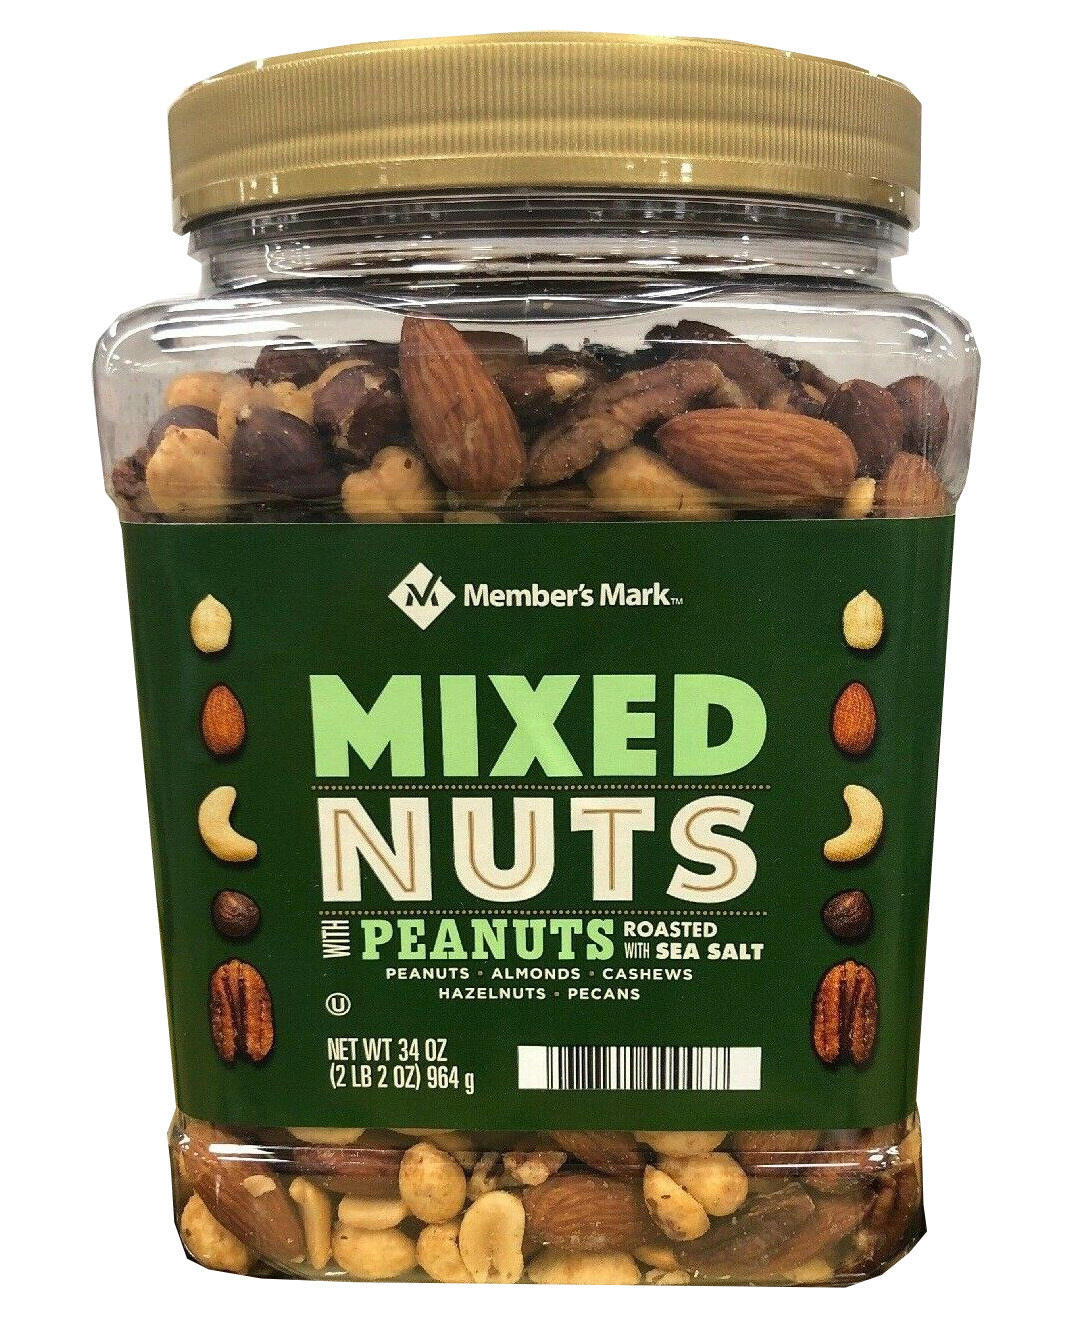 Primary image for Member's Mark Roasted and Salted Mixed Nuts with Peanuts (34 oz.)